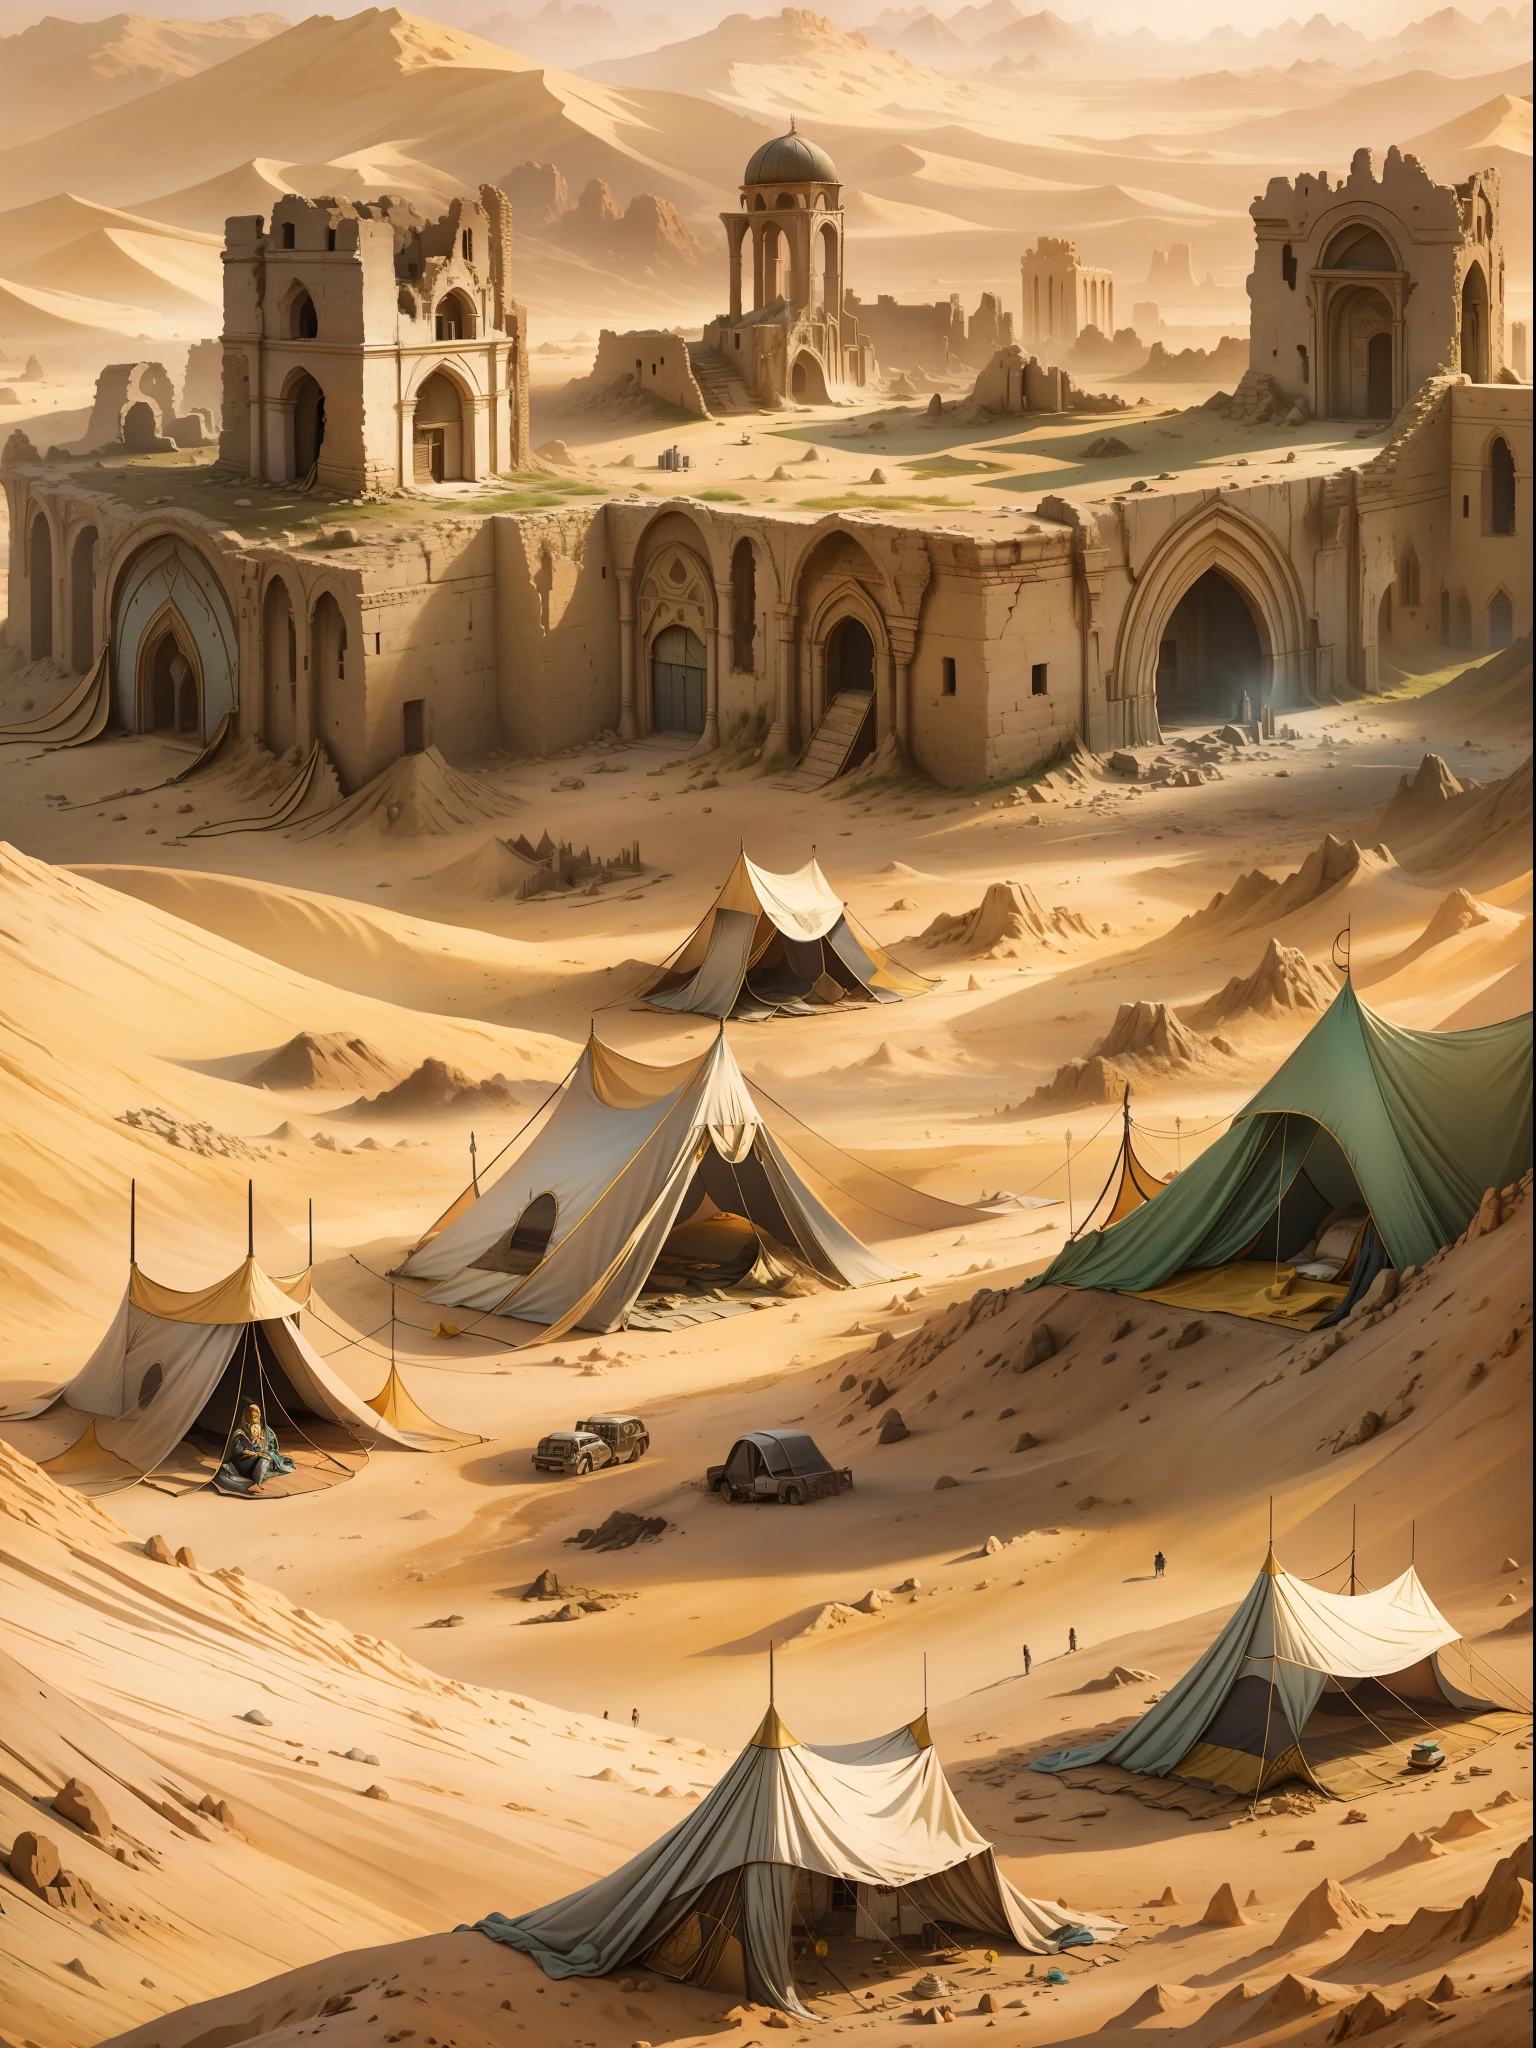 The ruins of the once majestic city of magicians. Around the desert and sand dunes, He covered the destroyed stones and filled the tower, leaving only a small part of it on the surface. Nearby you can see the black gaping entrance deep into the ruins. Near the entrance there is a small tent camp, Next to the tents are boxes and tables. Near one of the tents you can see a dried, bloody footprint, going deep into the tent